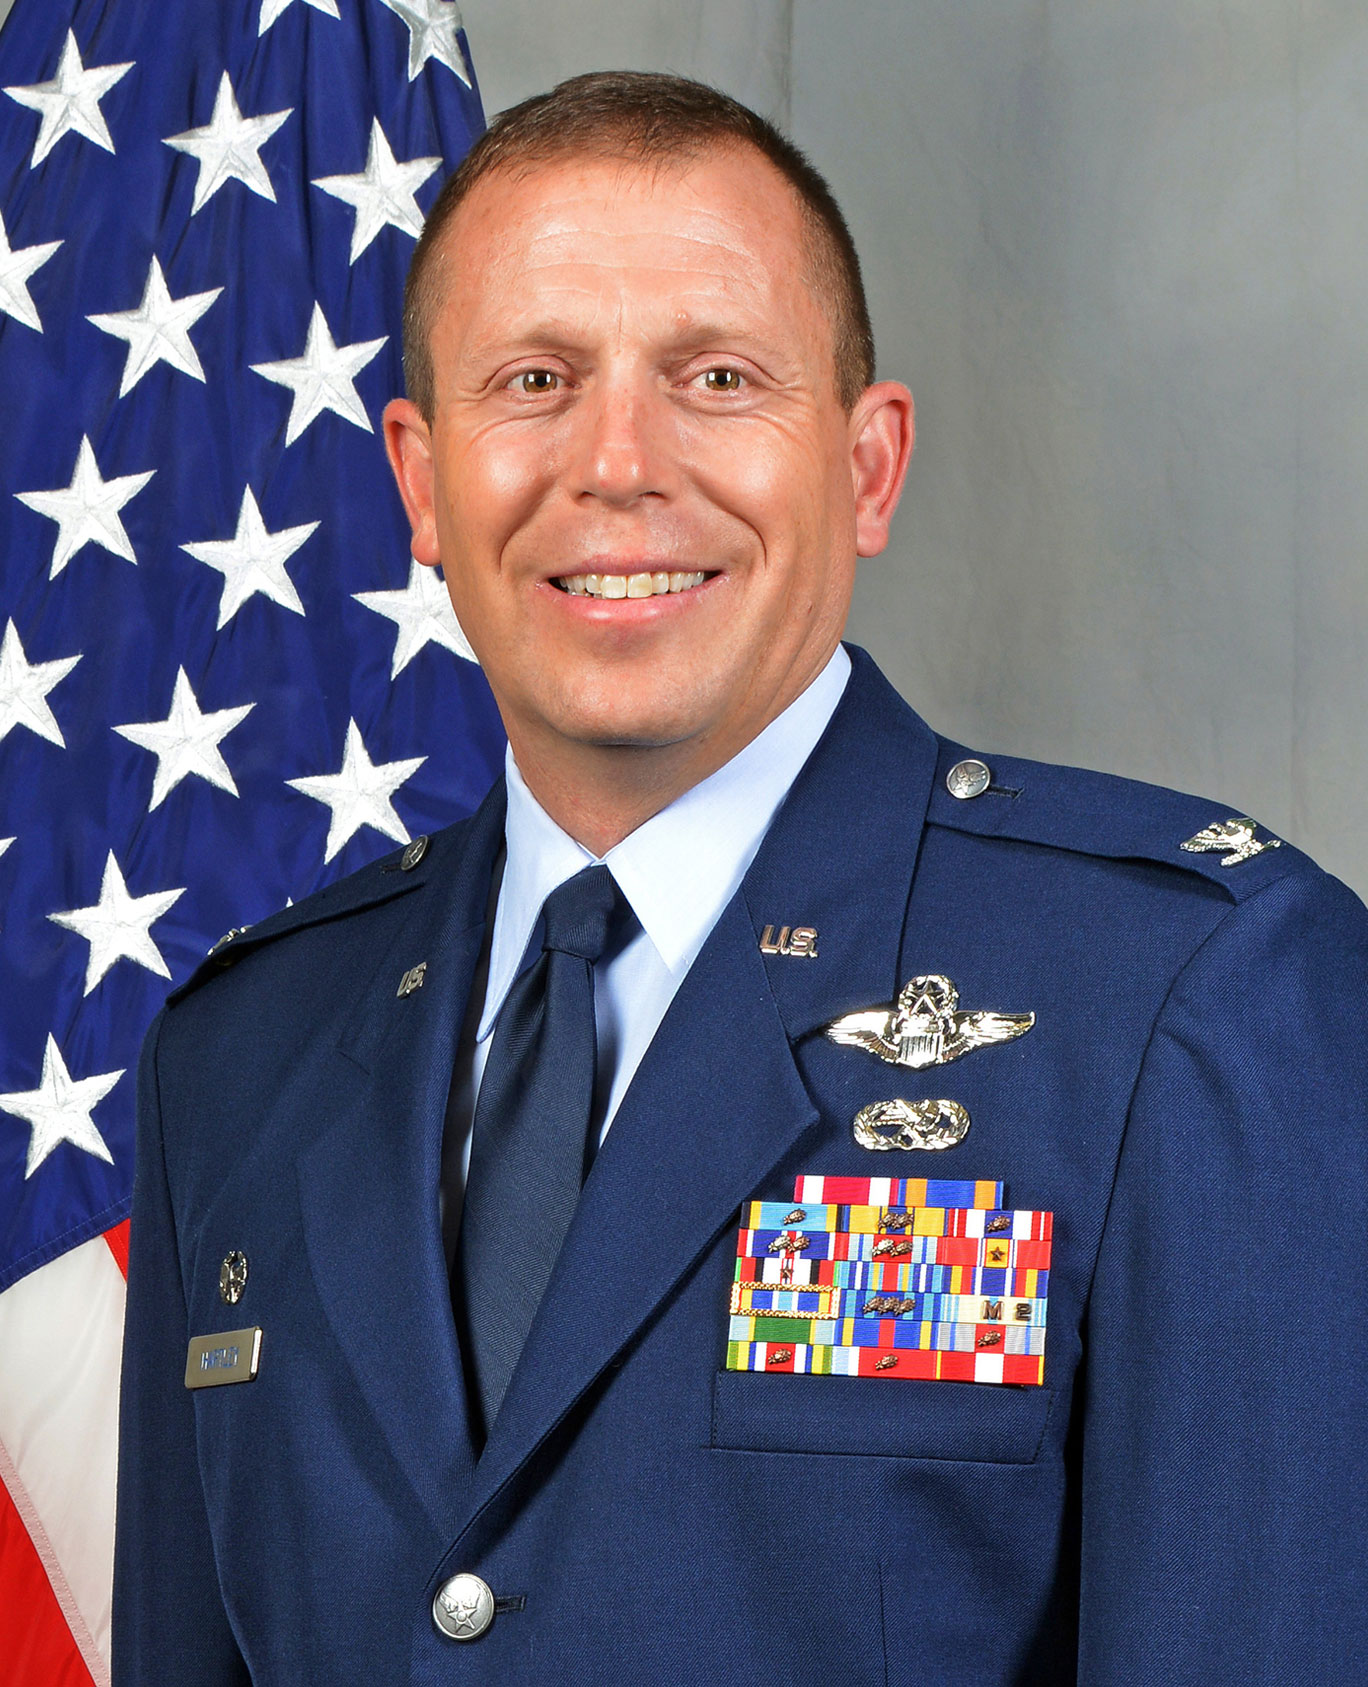 An image of Colonel M. Lee Hartley, Jr.